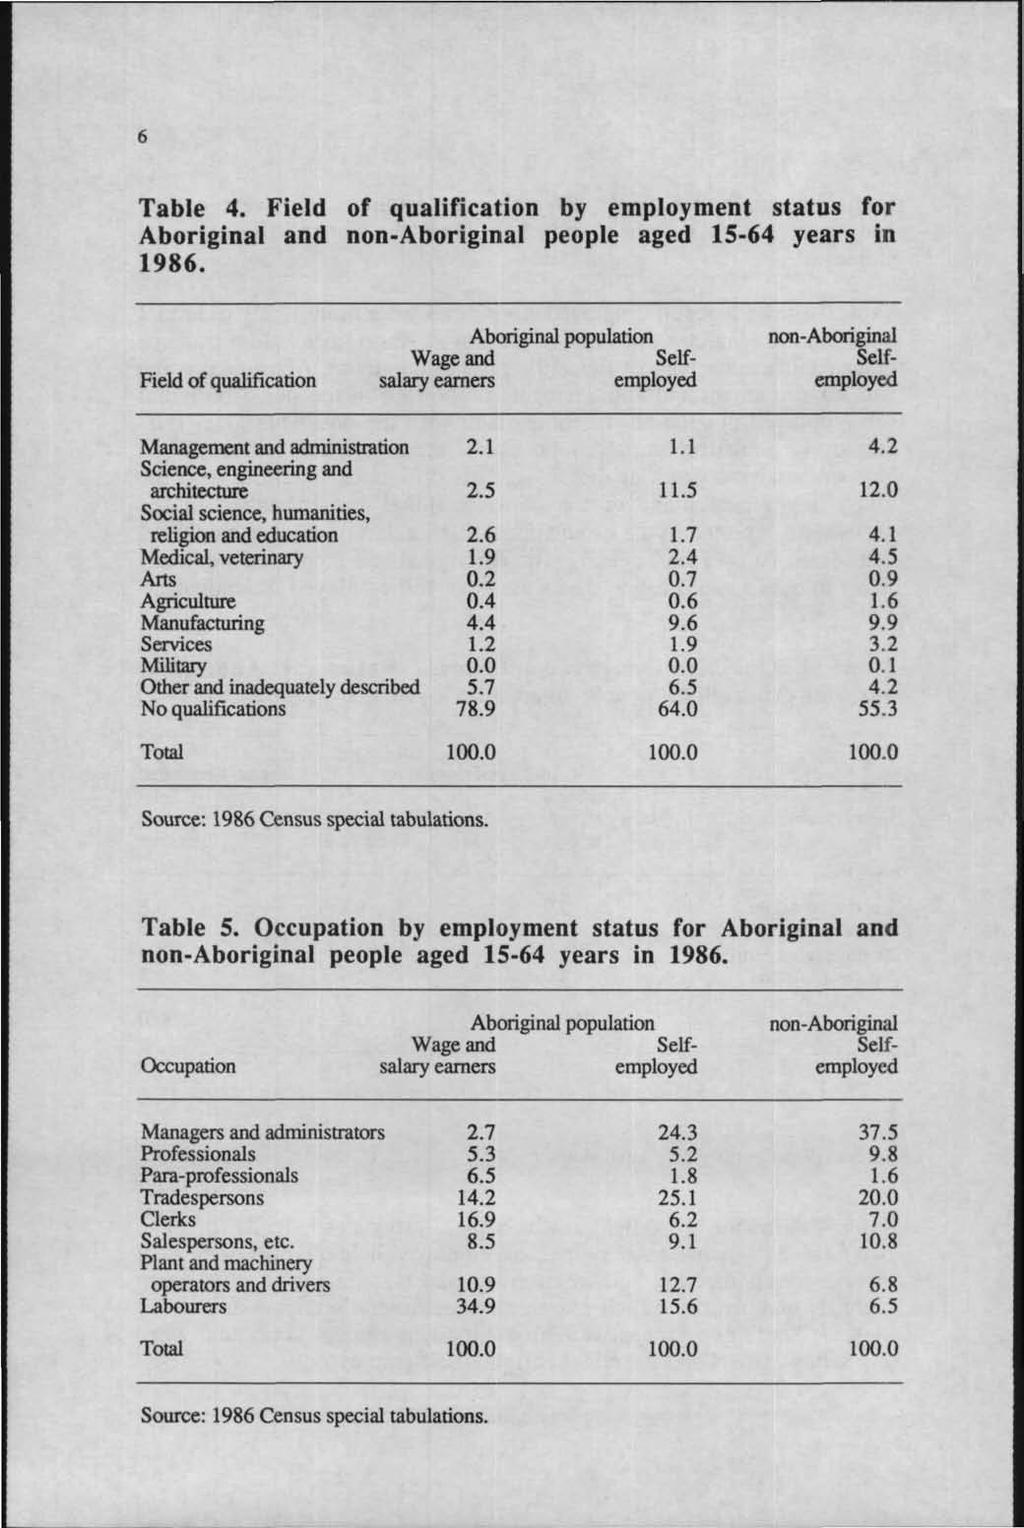 Table 4. Field of qualification by employment status for Aboriginal and non-aboriginal people aged 15-64 years in 1986.